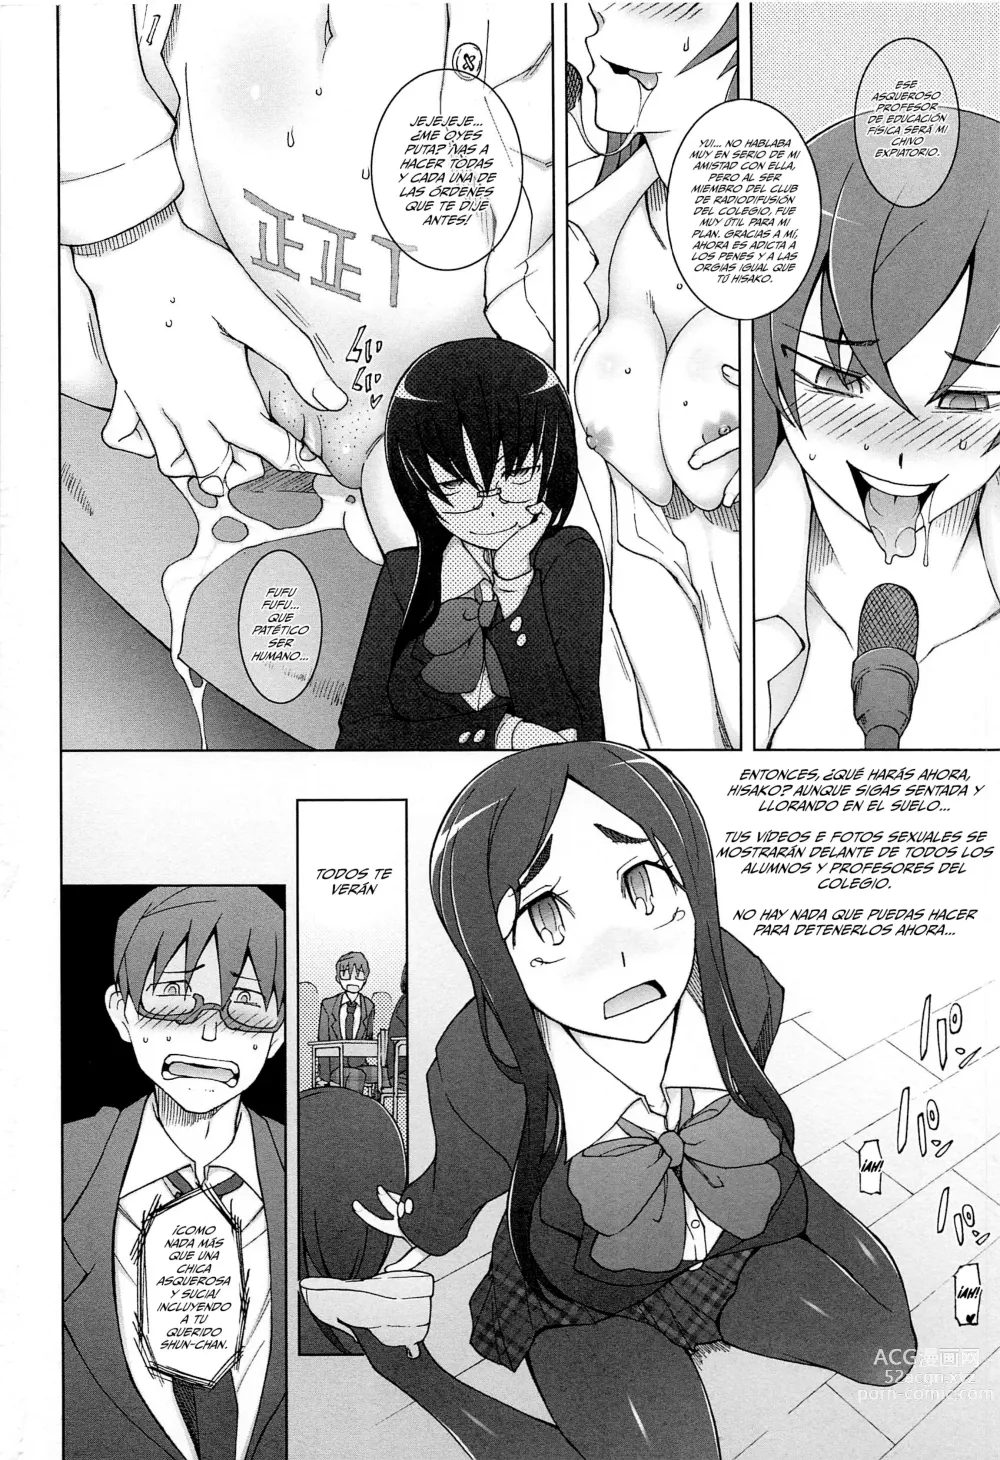 Page 3 of manga LUSTFUL BERRY Ch. 6